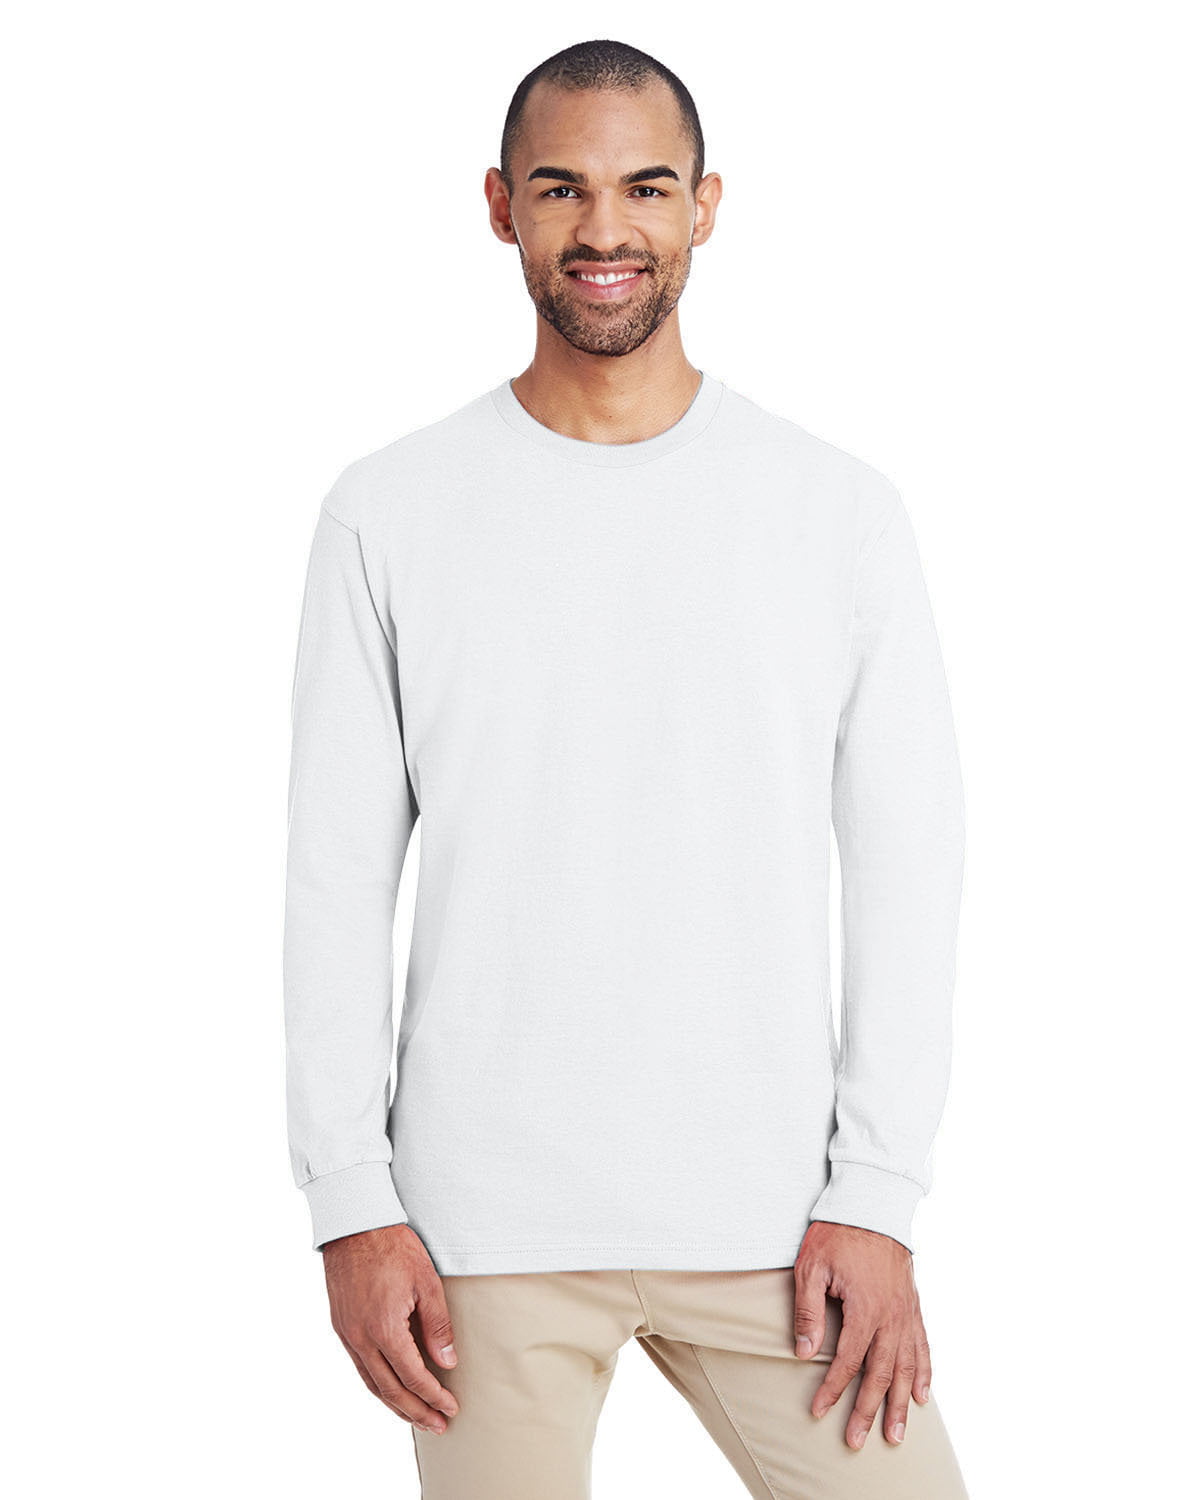 JustBlanks Men's Hammer Long Sleeve Tee Shirt 100% Combed Cotton T